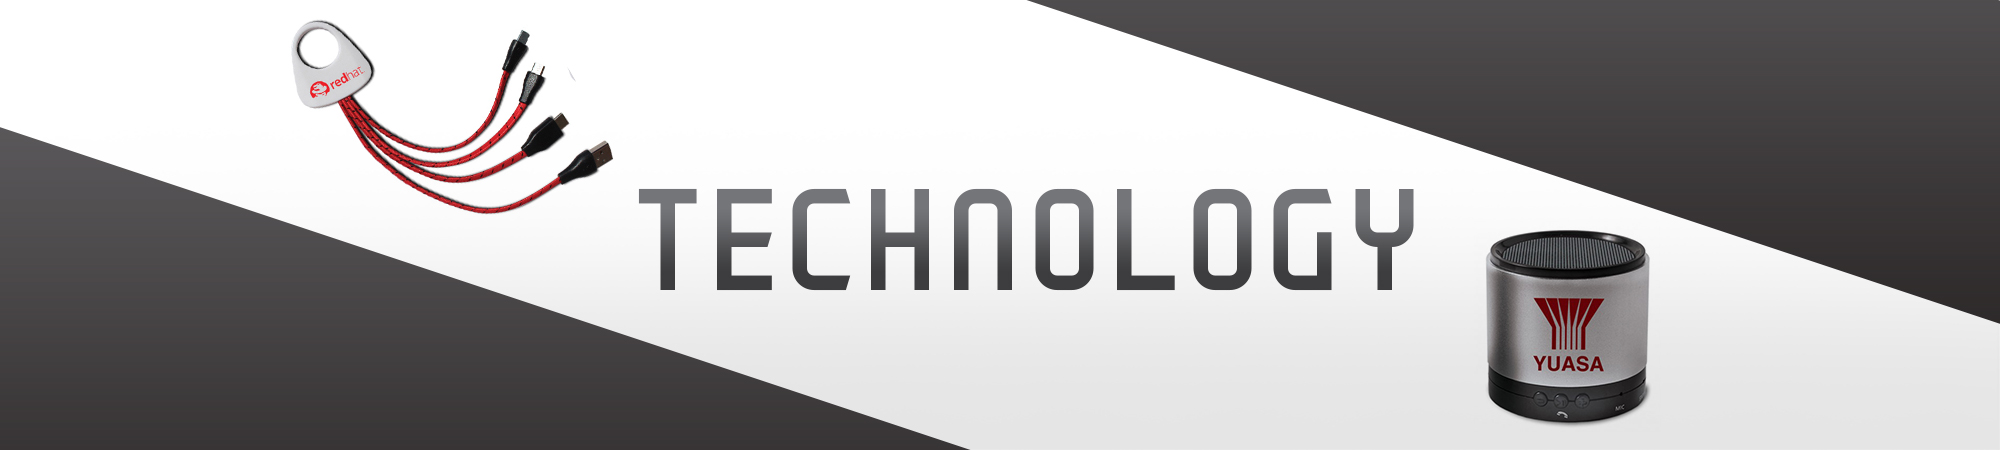 technology-products-with-logo-banner